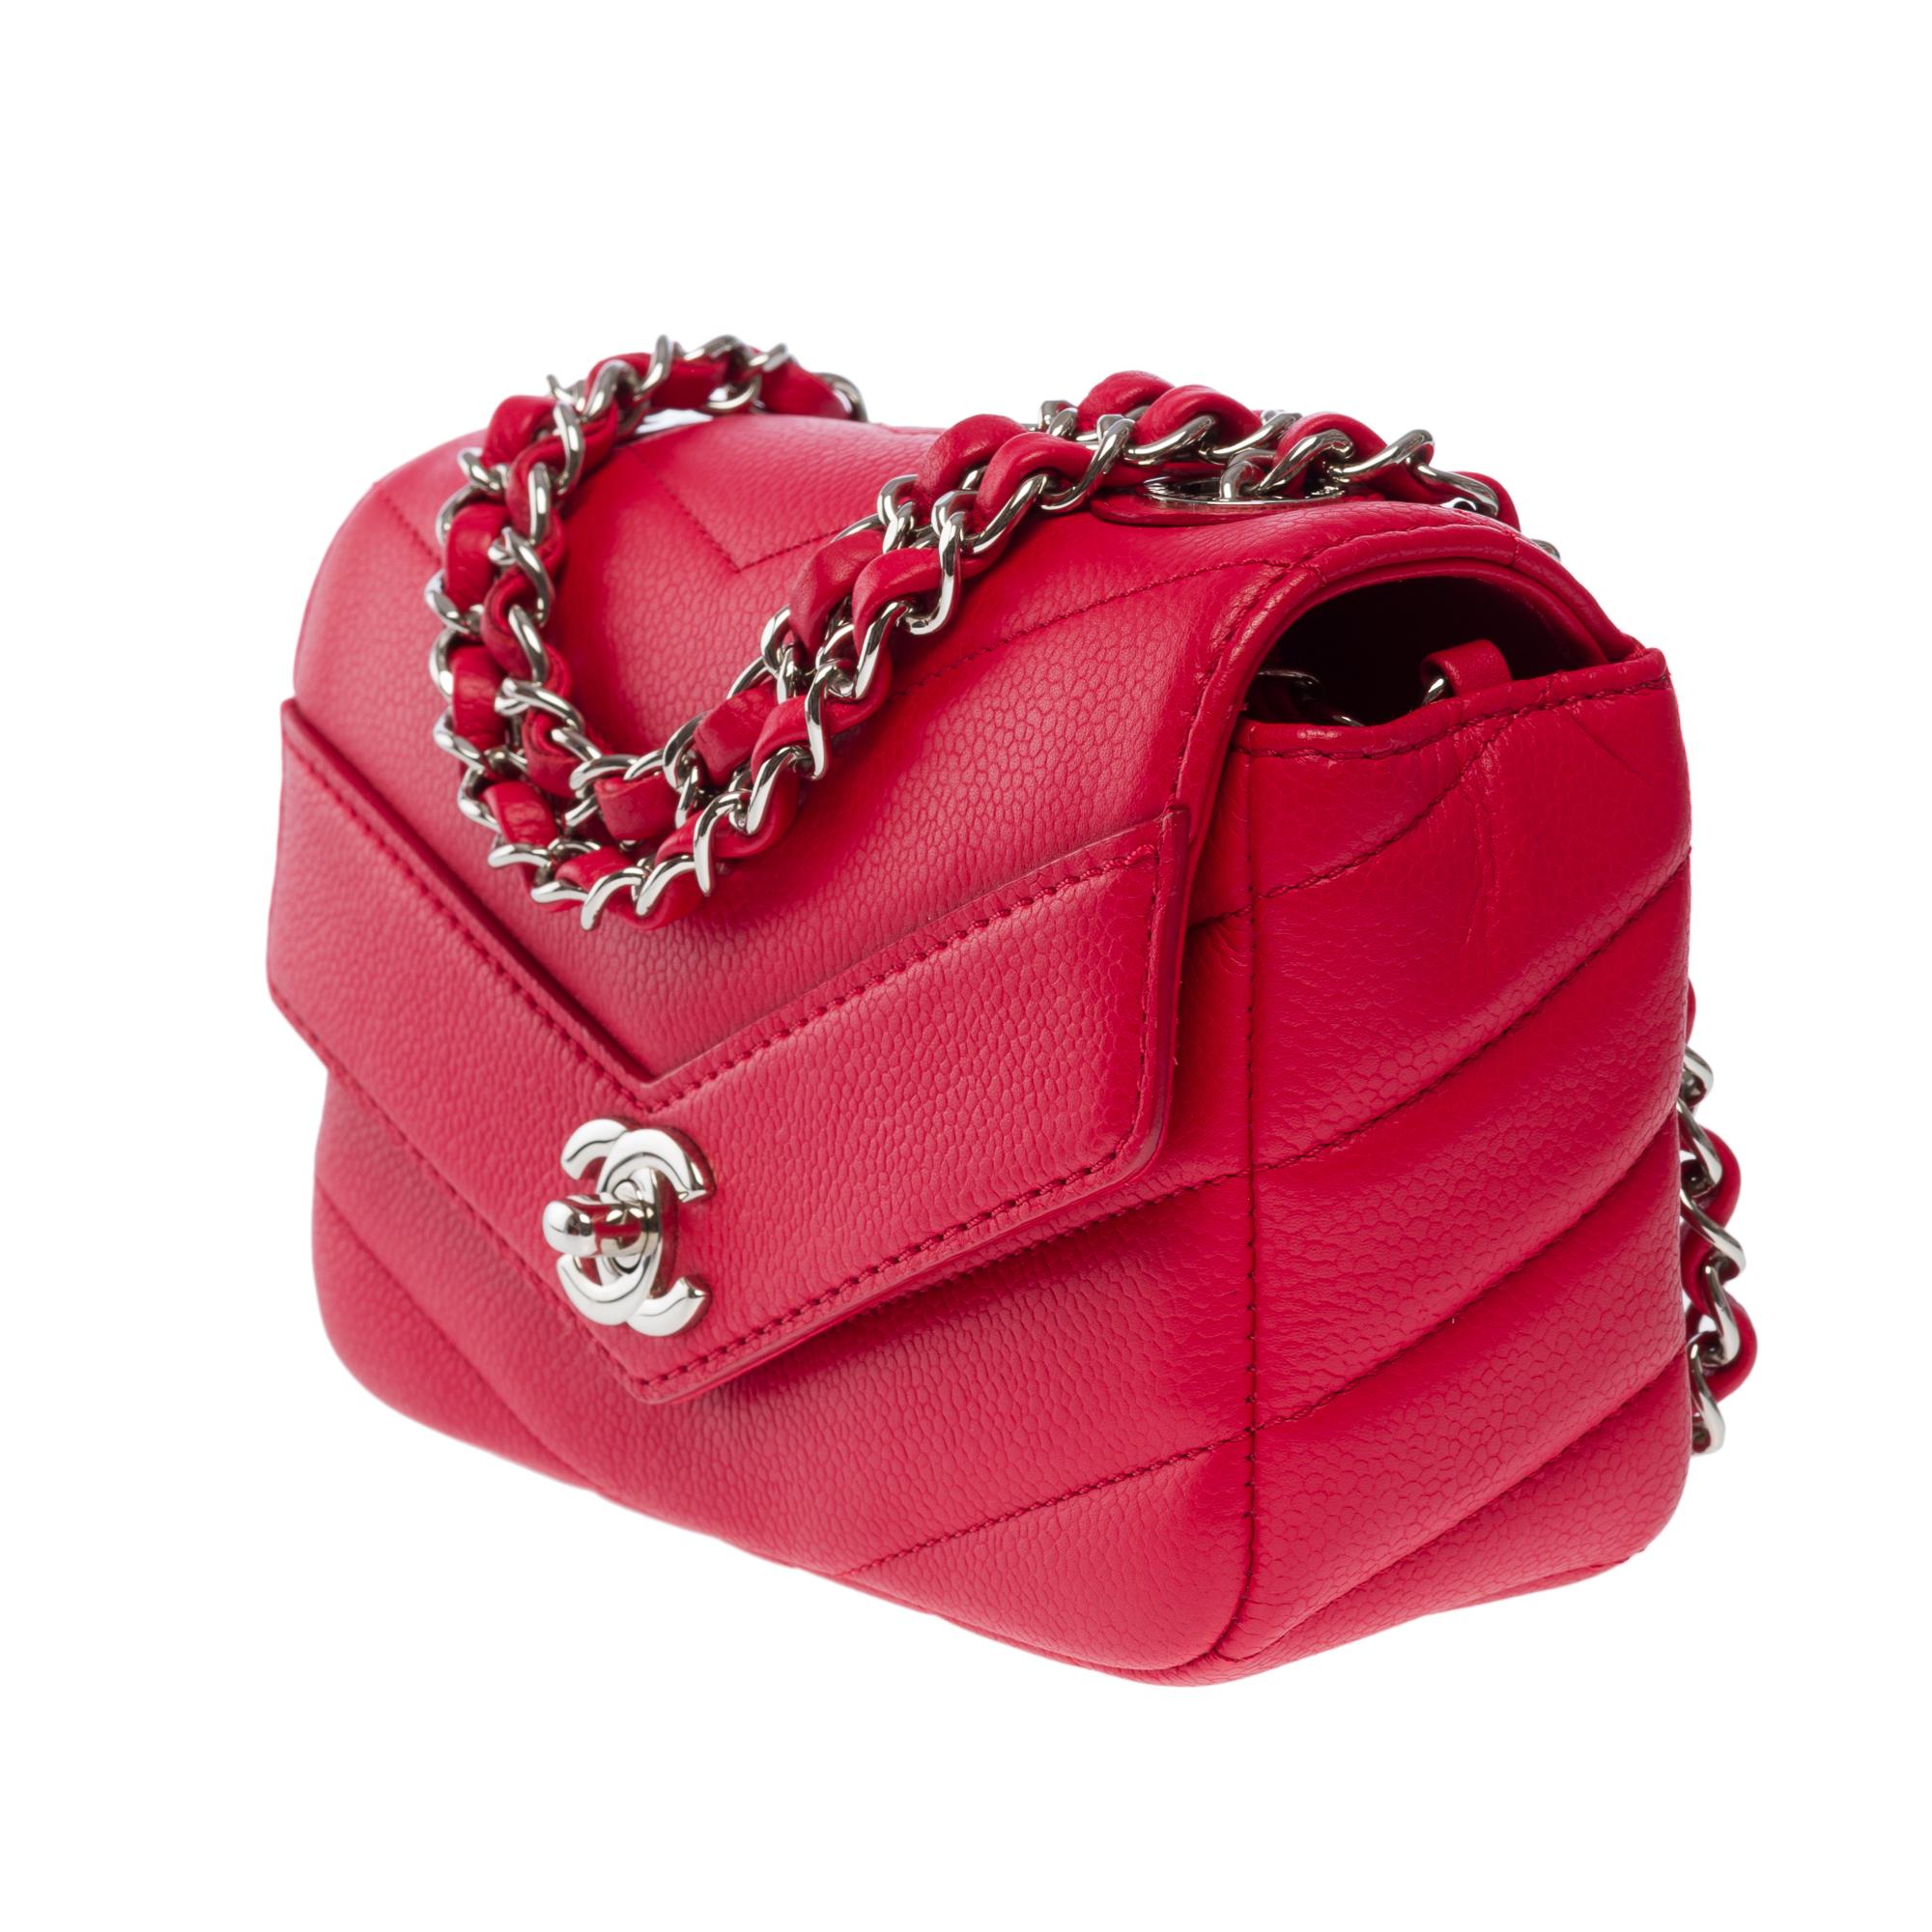 Women's Chanel Mini Timeless shoulder bag in red herringbone quilted caviar leather, SHW For Sale